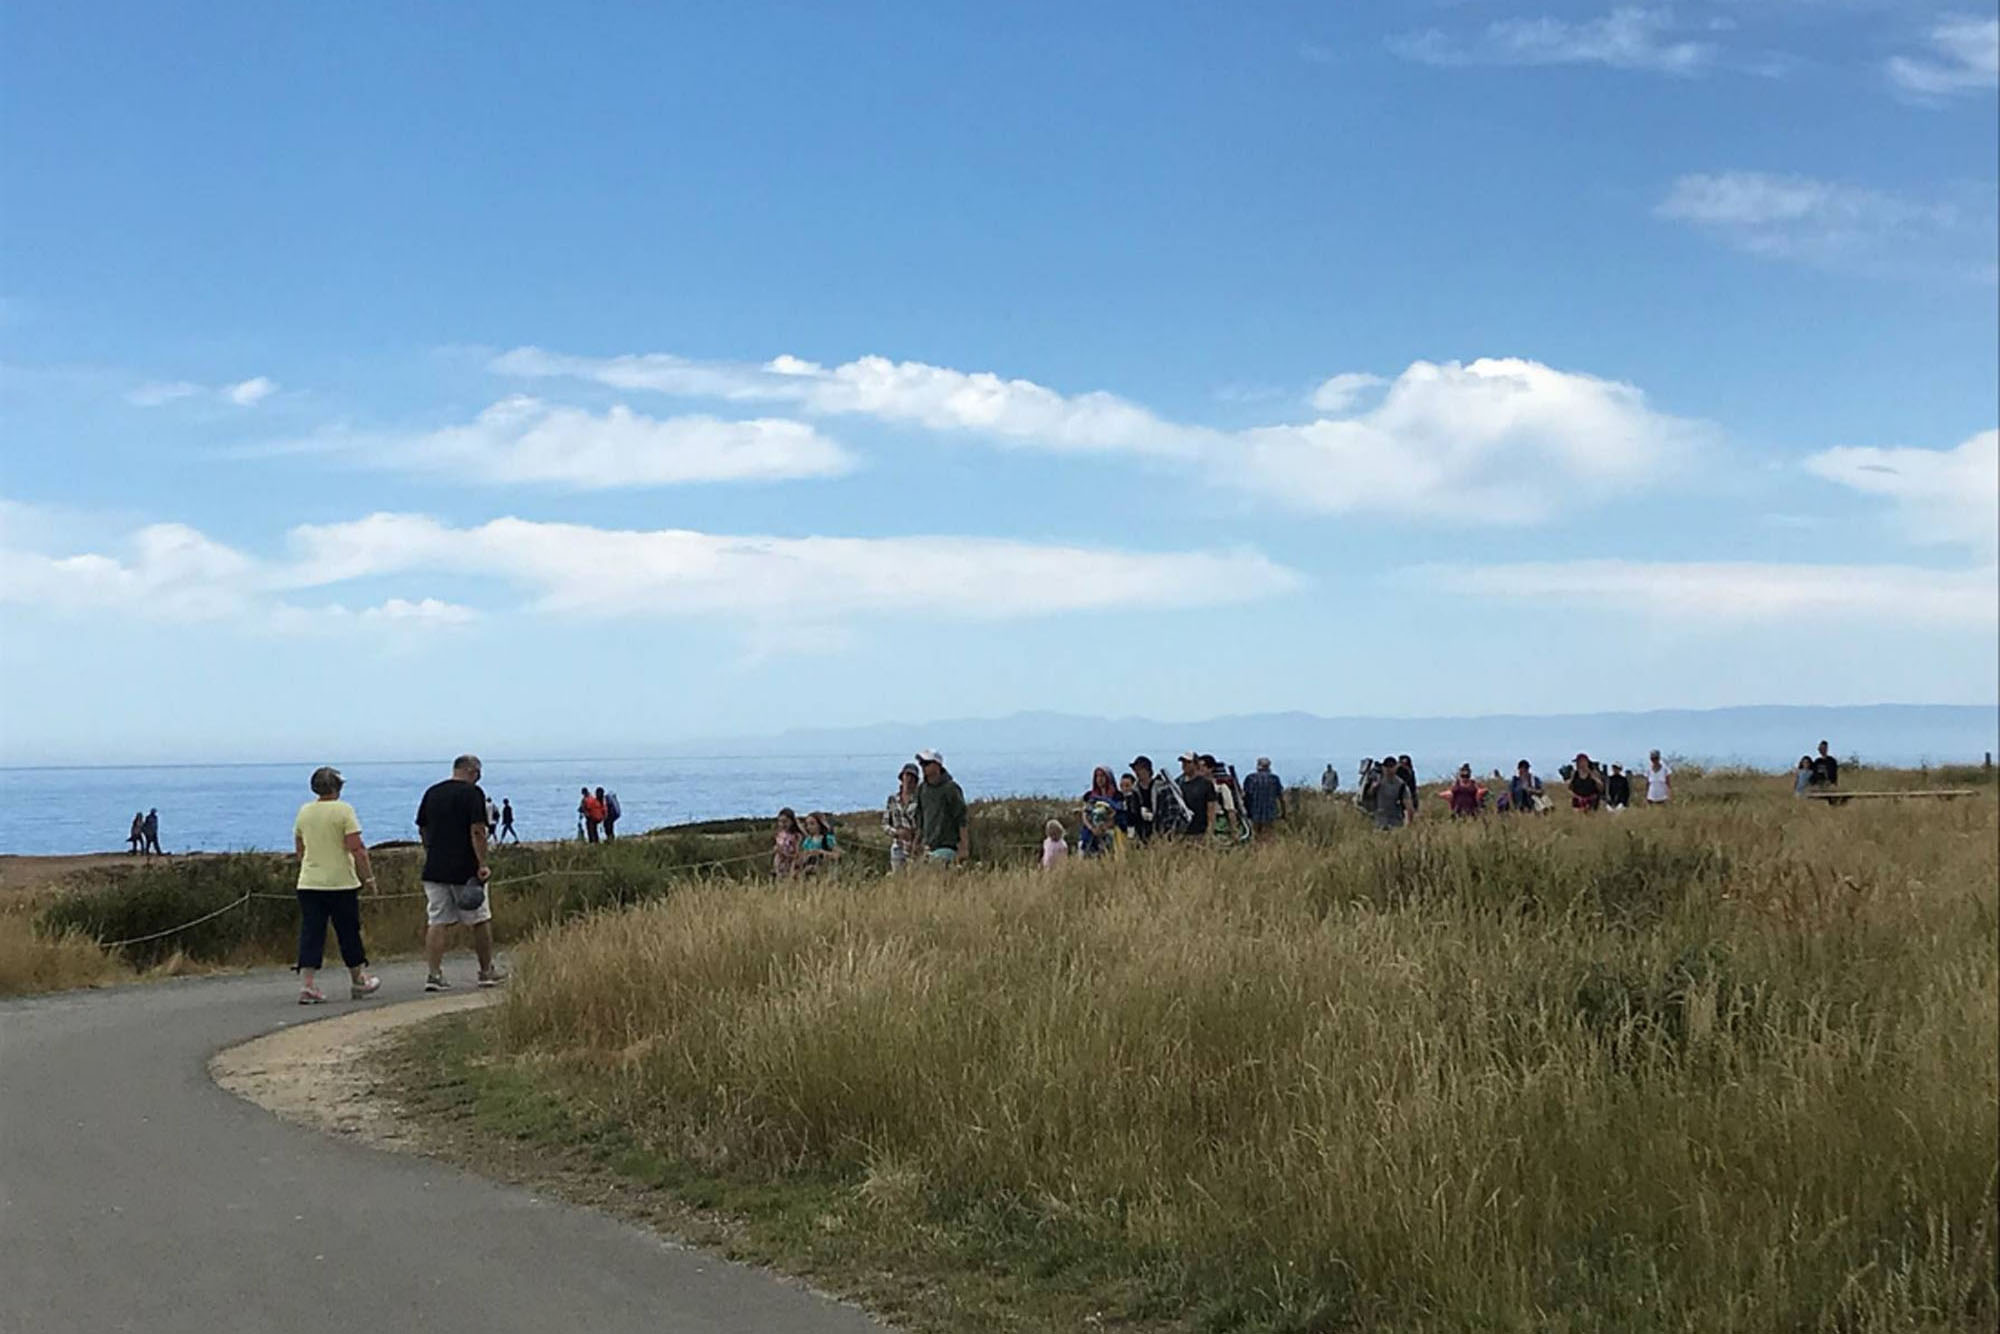 People walking above the rocky shoreline on a paved path surrounded by a tall grassy meadow